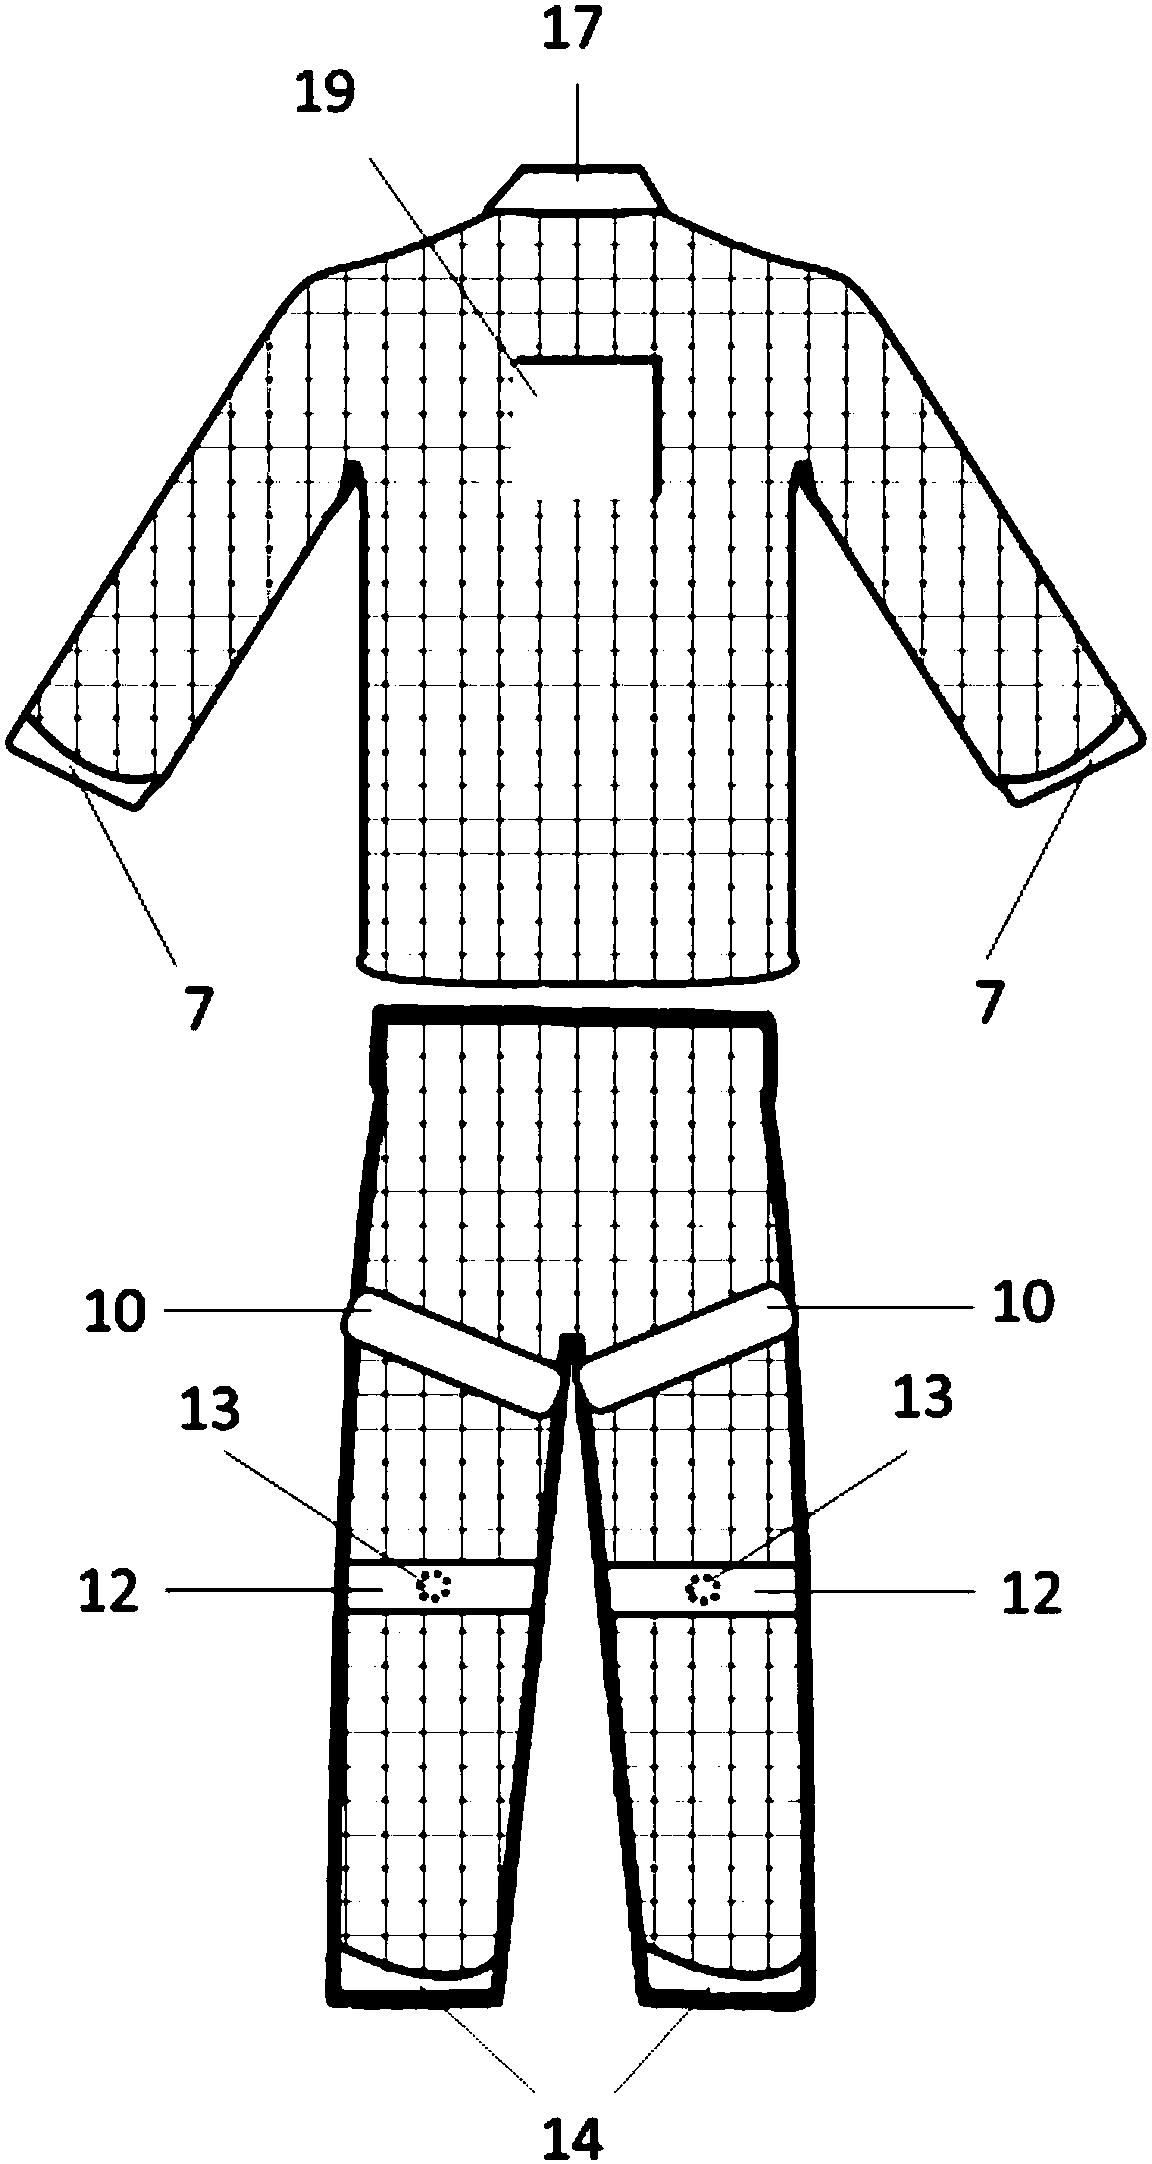 Garment capable of automatically recognizing limb injuries and giving early-stage medical intervention